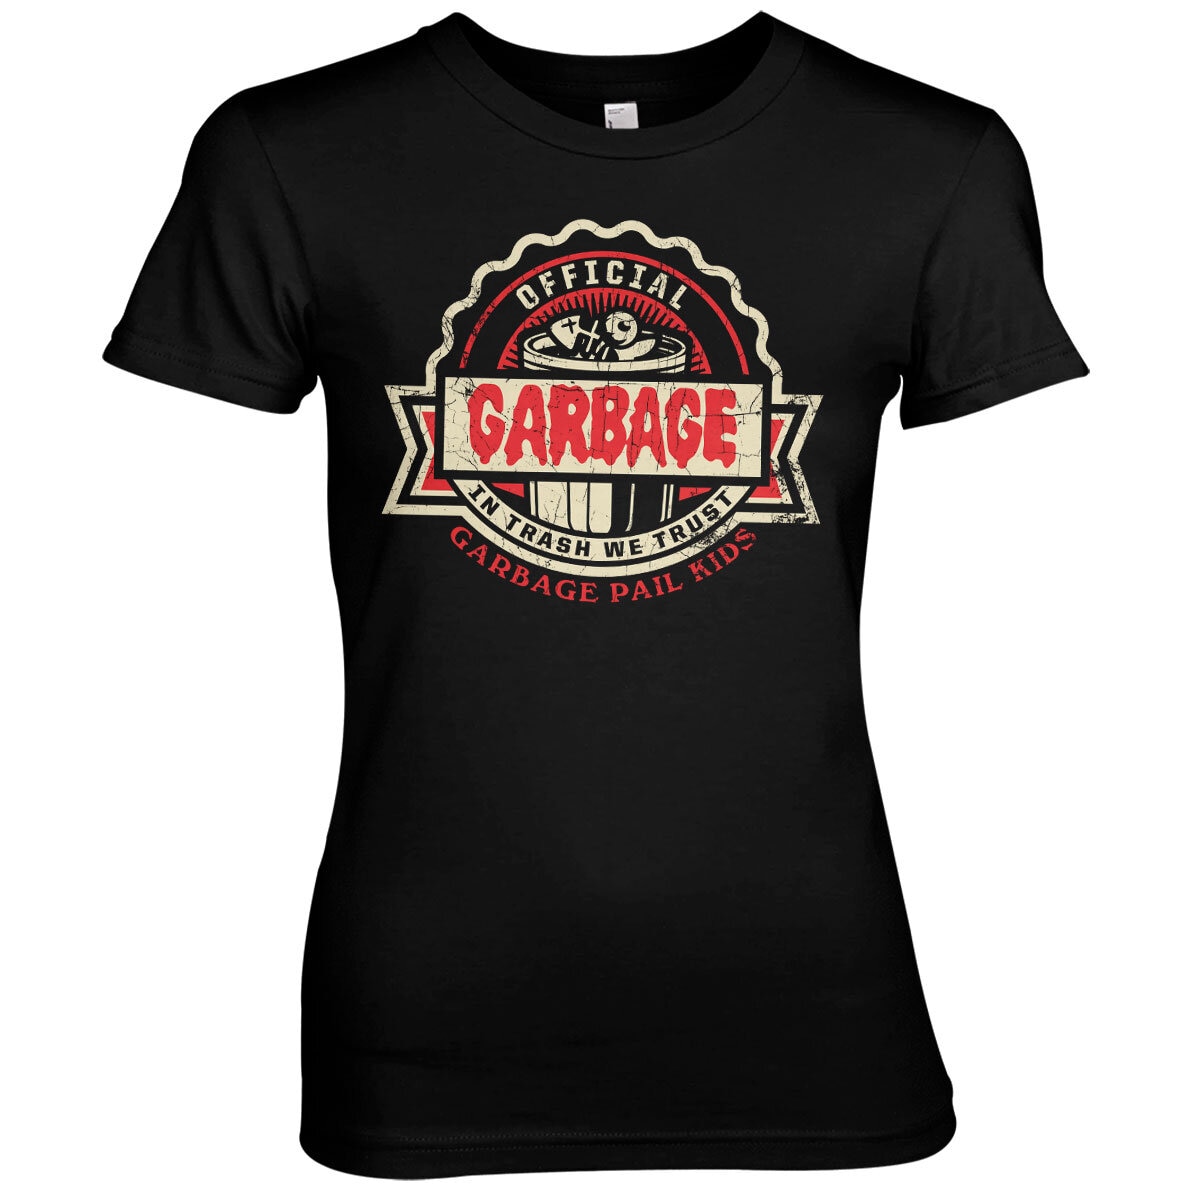 Official Garbage Girly Tee